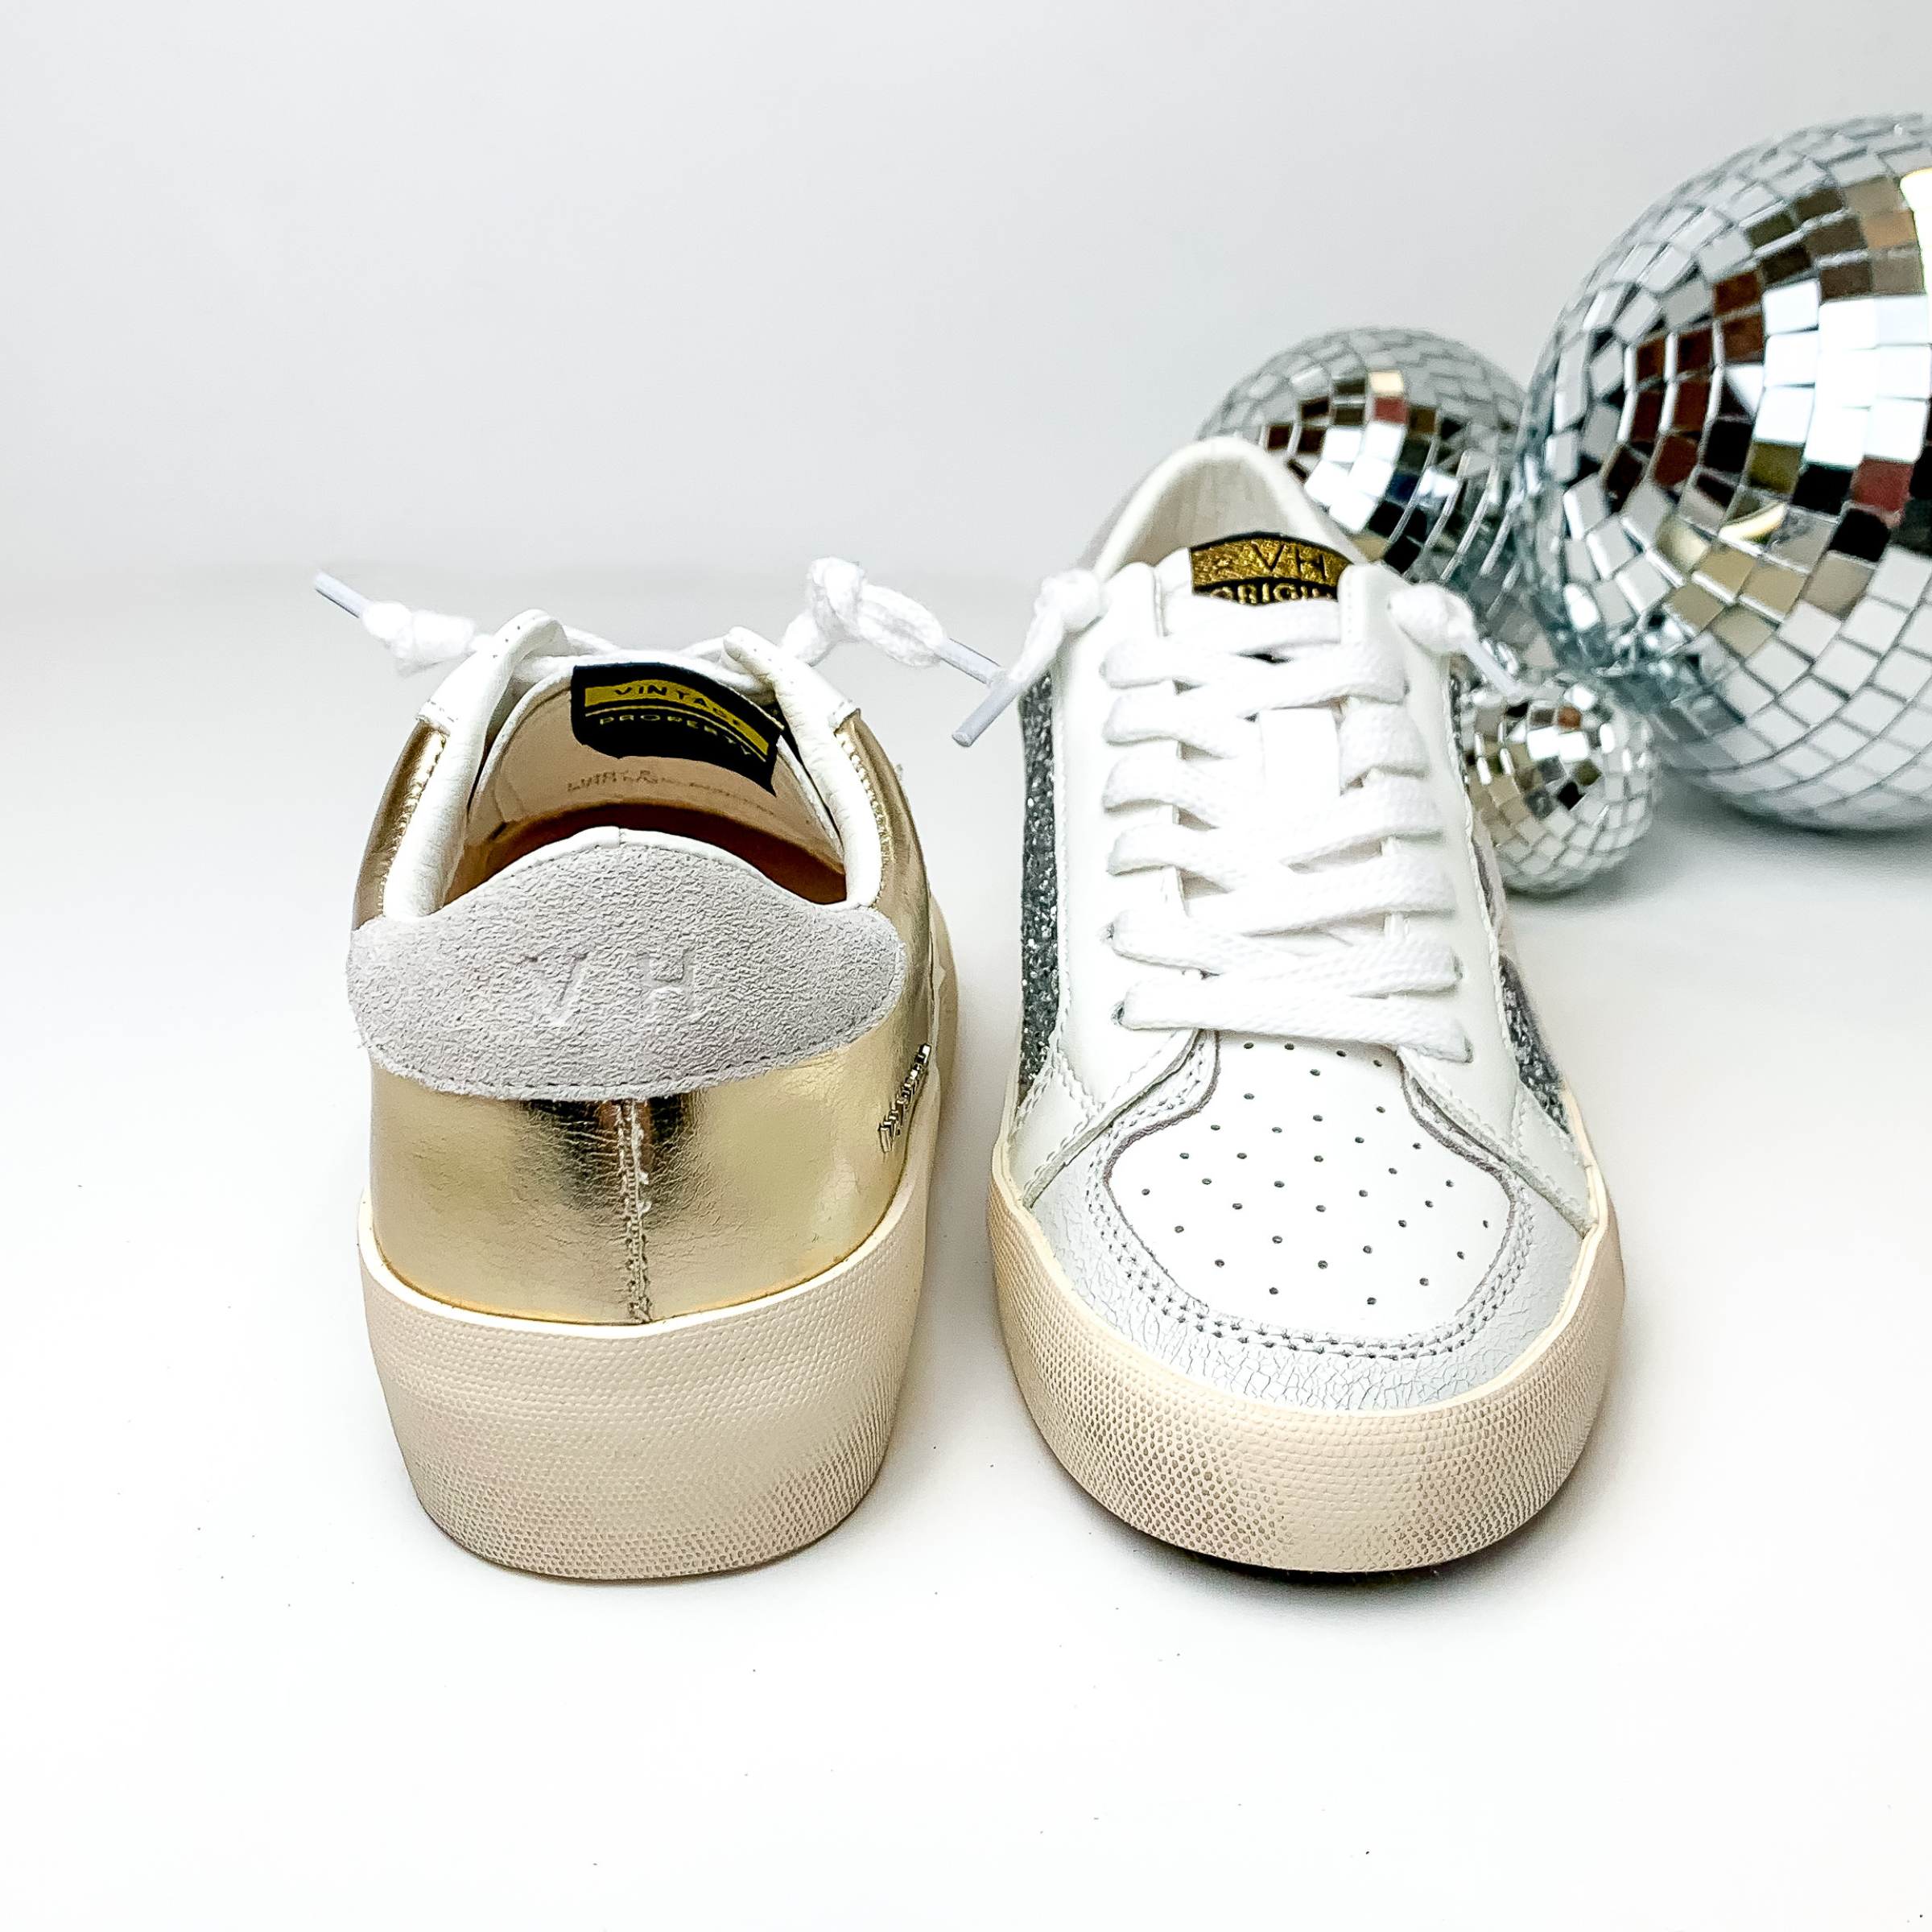 Vintage Havana | Libby Sneakers in Gold with Silver Glitter - Giddy Up Glamour Boutique